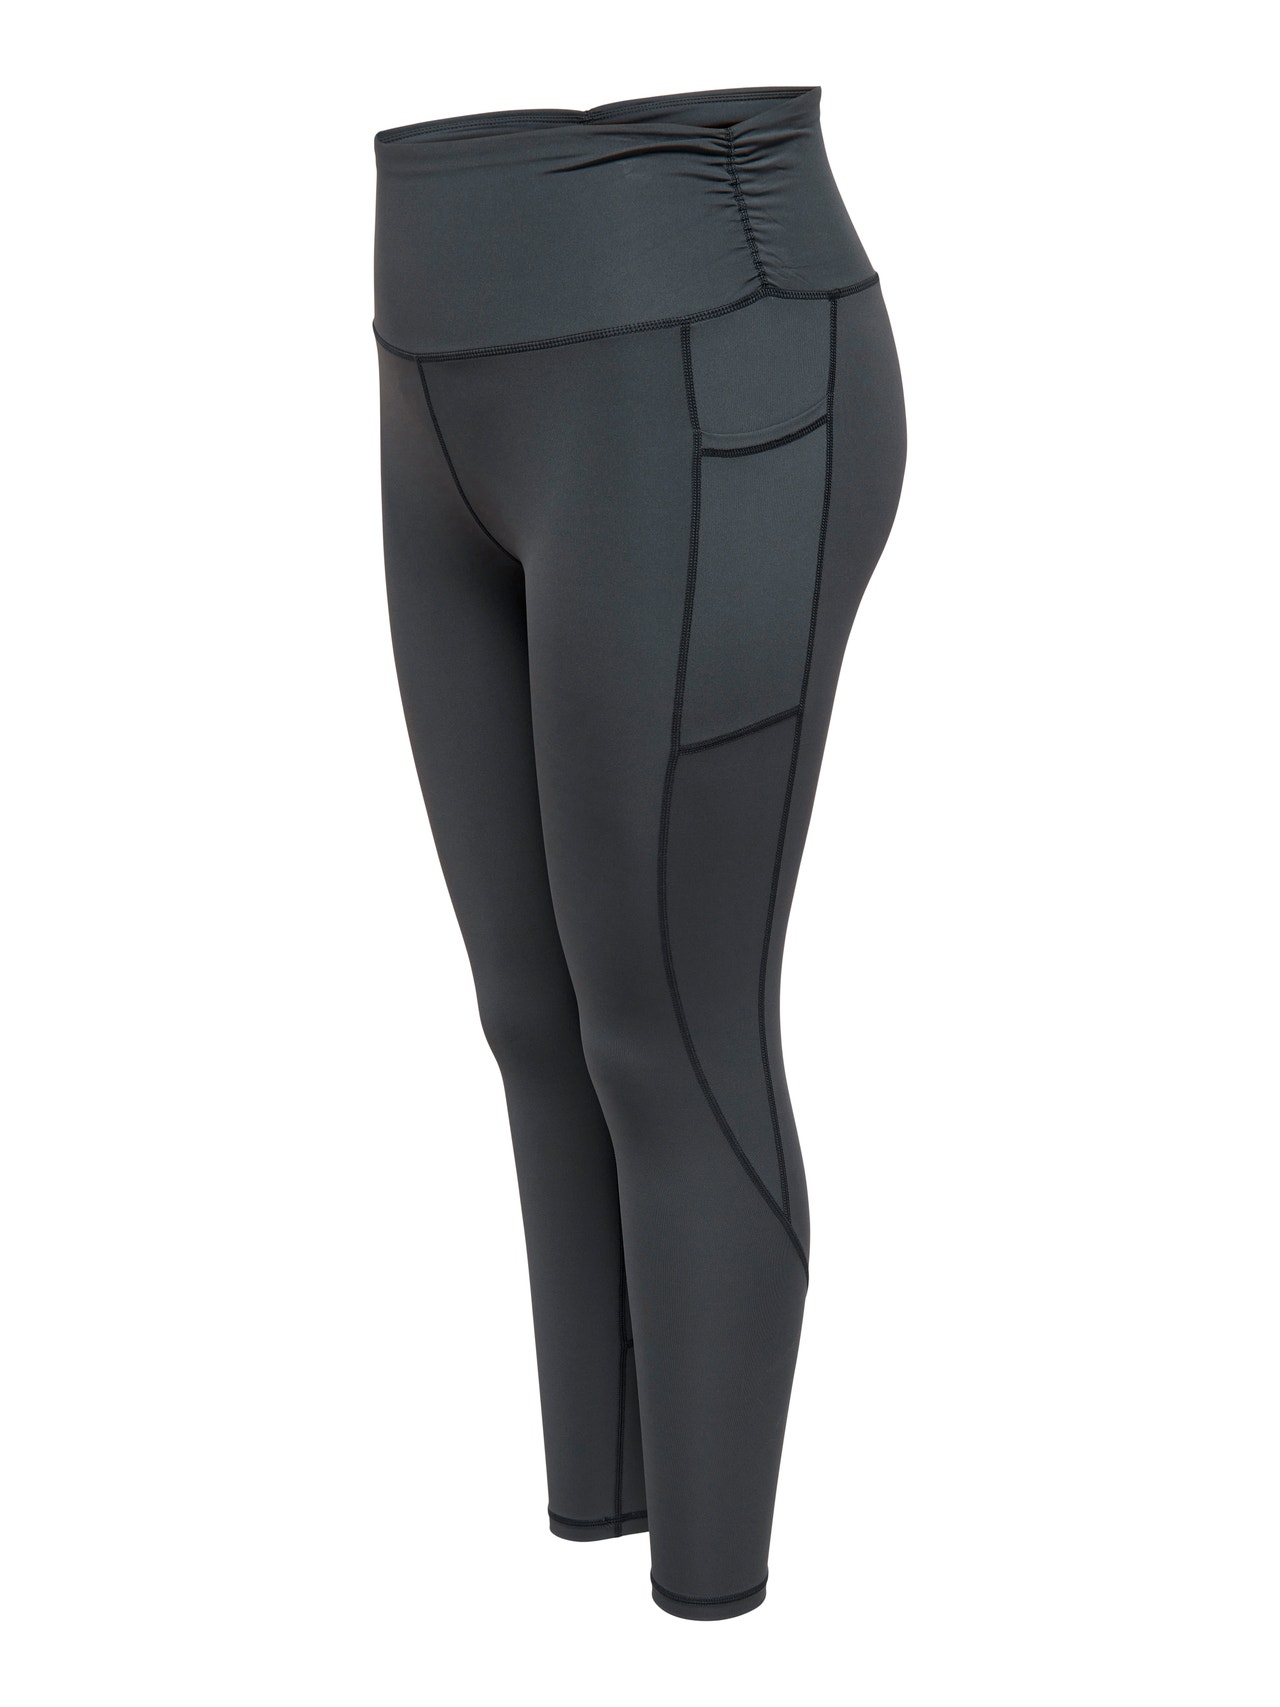 ONLY Tight Fit High waist Curve Leggings -Nine Iron - 15262812